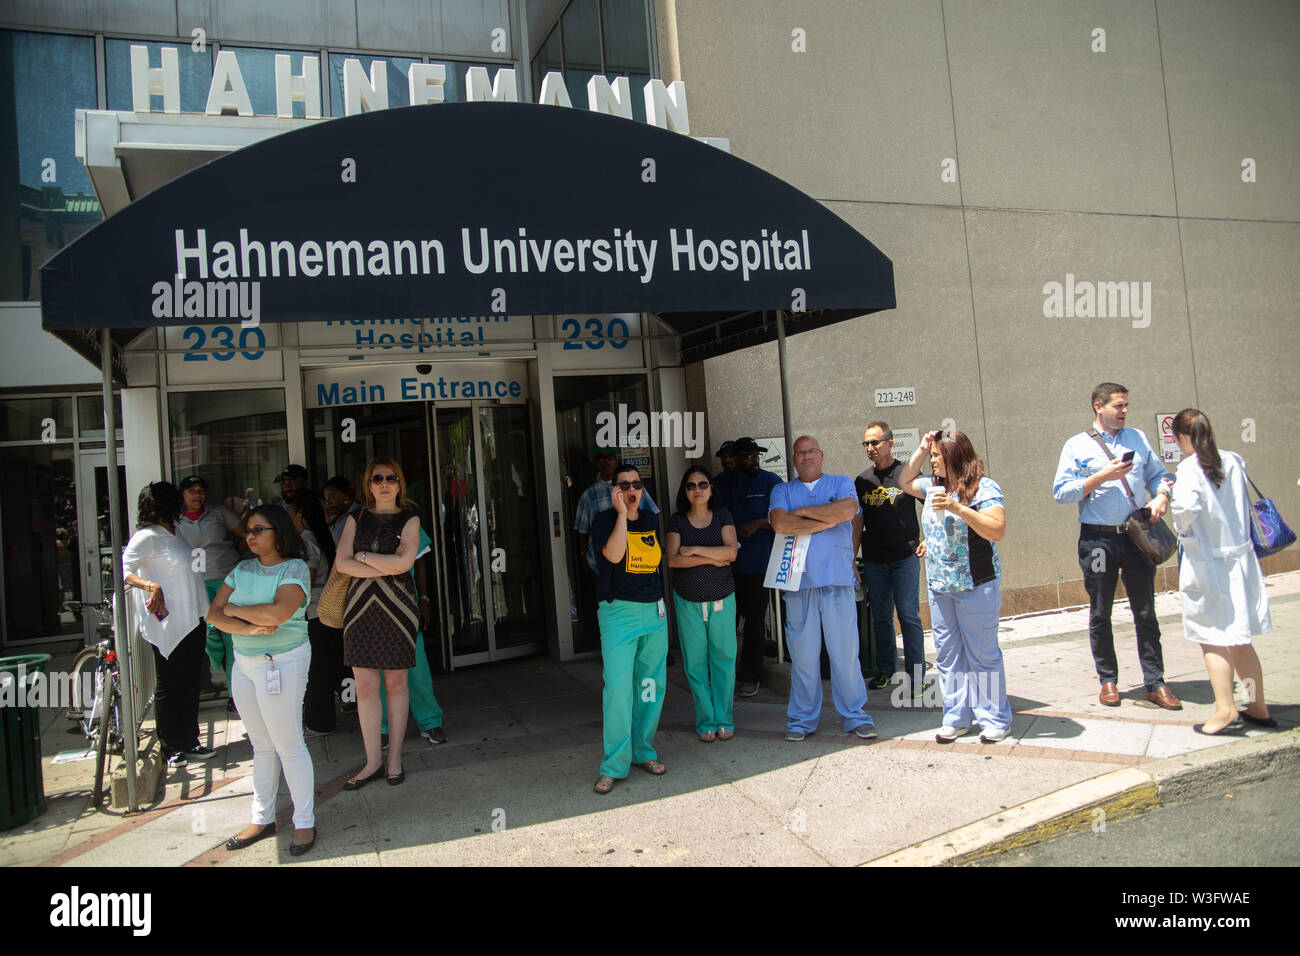 Philadelphia, Pennsylvania, USA. 15th July, 2019. A crowd of hundreds gathers to protest the closure of Hahnemann University Hospital in Philadelphia, PA, July 15, 2019. Hahnemann, a busy urban healthcare center, is facing imminent closure after being acquired by a hedge fund that is looking to raze the building and turn the land into rental or retail properties. 15th July, 2019. Credit: Michael Candelori/ZUMA Wire/Alamy Live News Credit: ZUMA Press, Inc./Alamy Live News Stock Photo